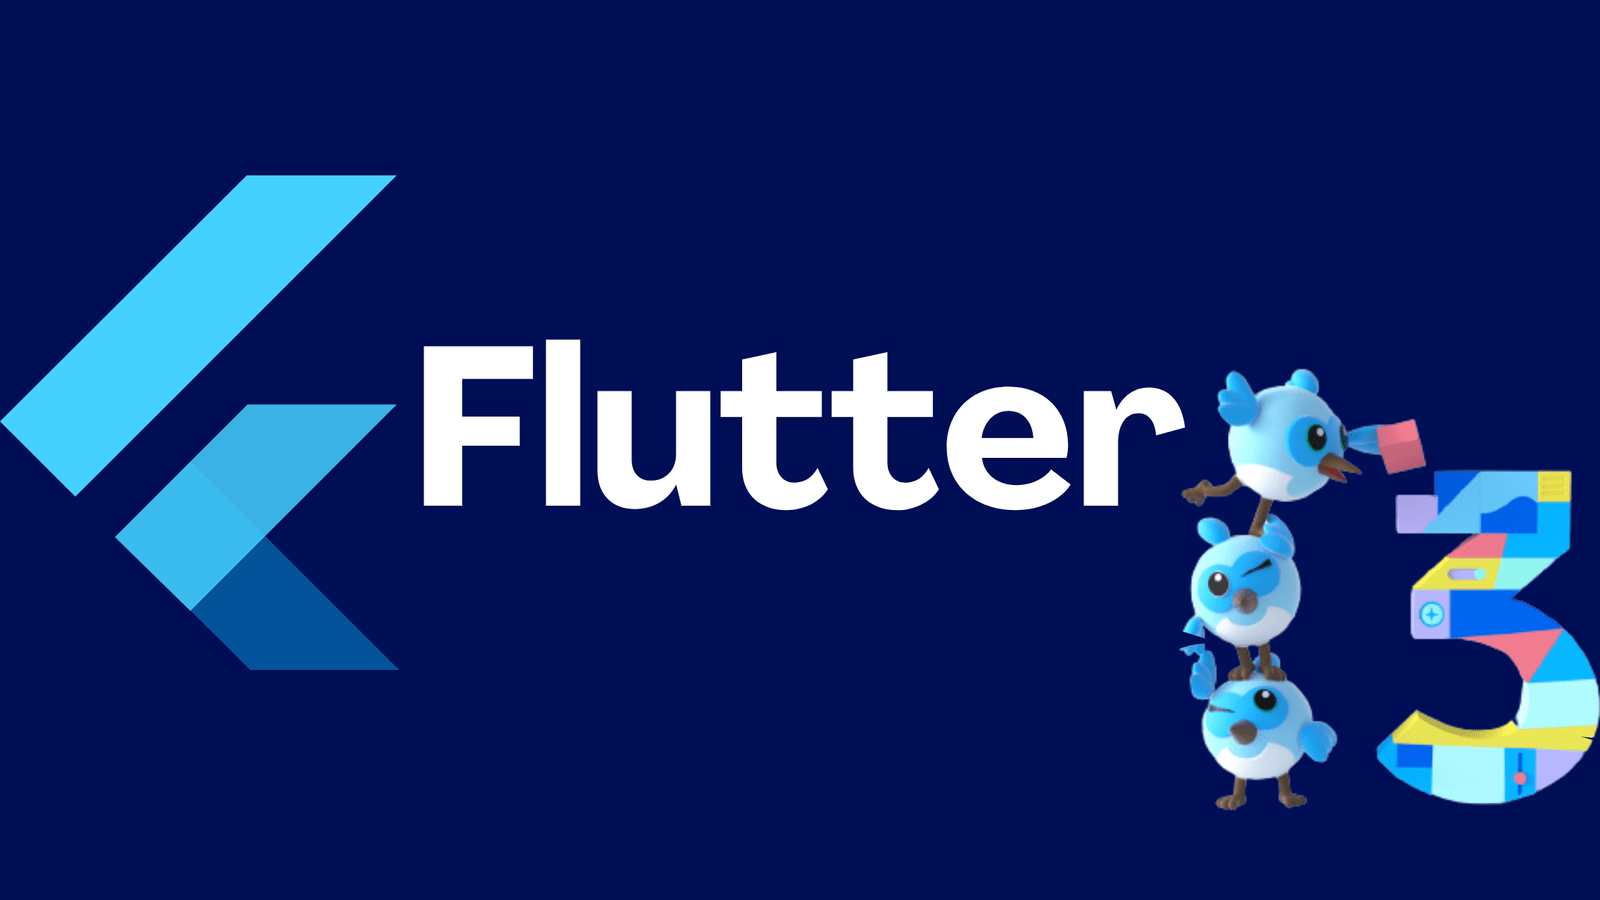 What’s new in Flutter